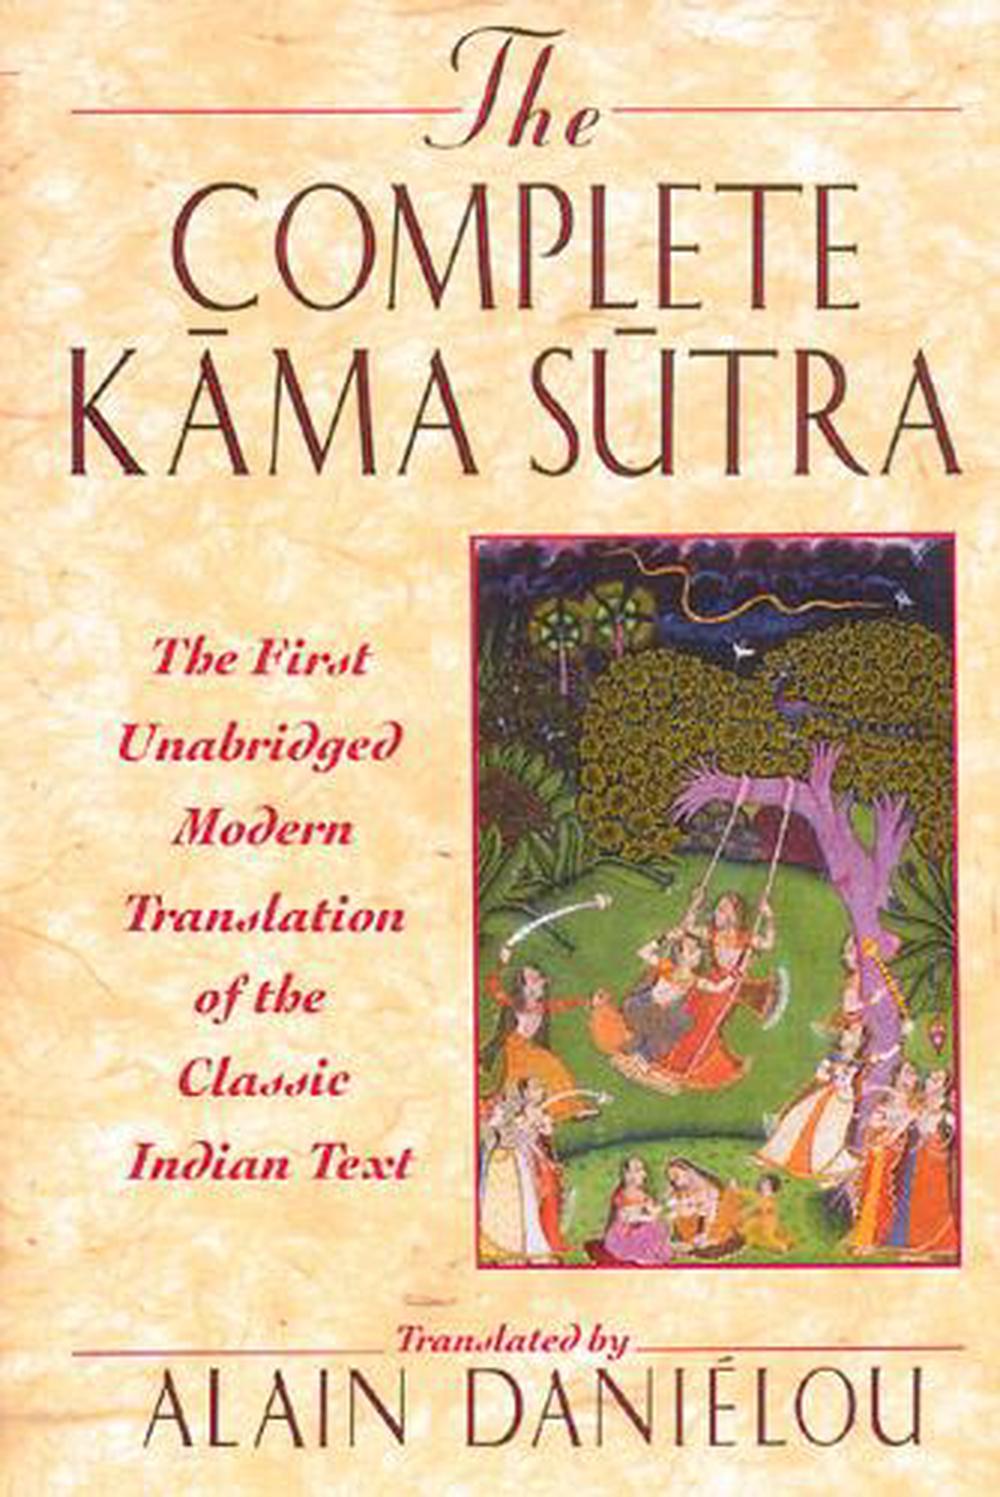 pictures or karma sutra positions